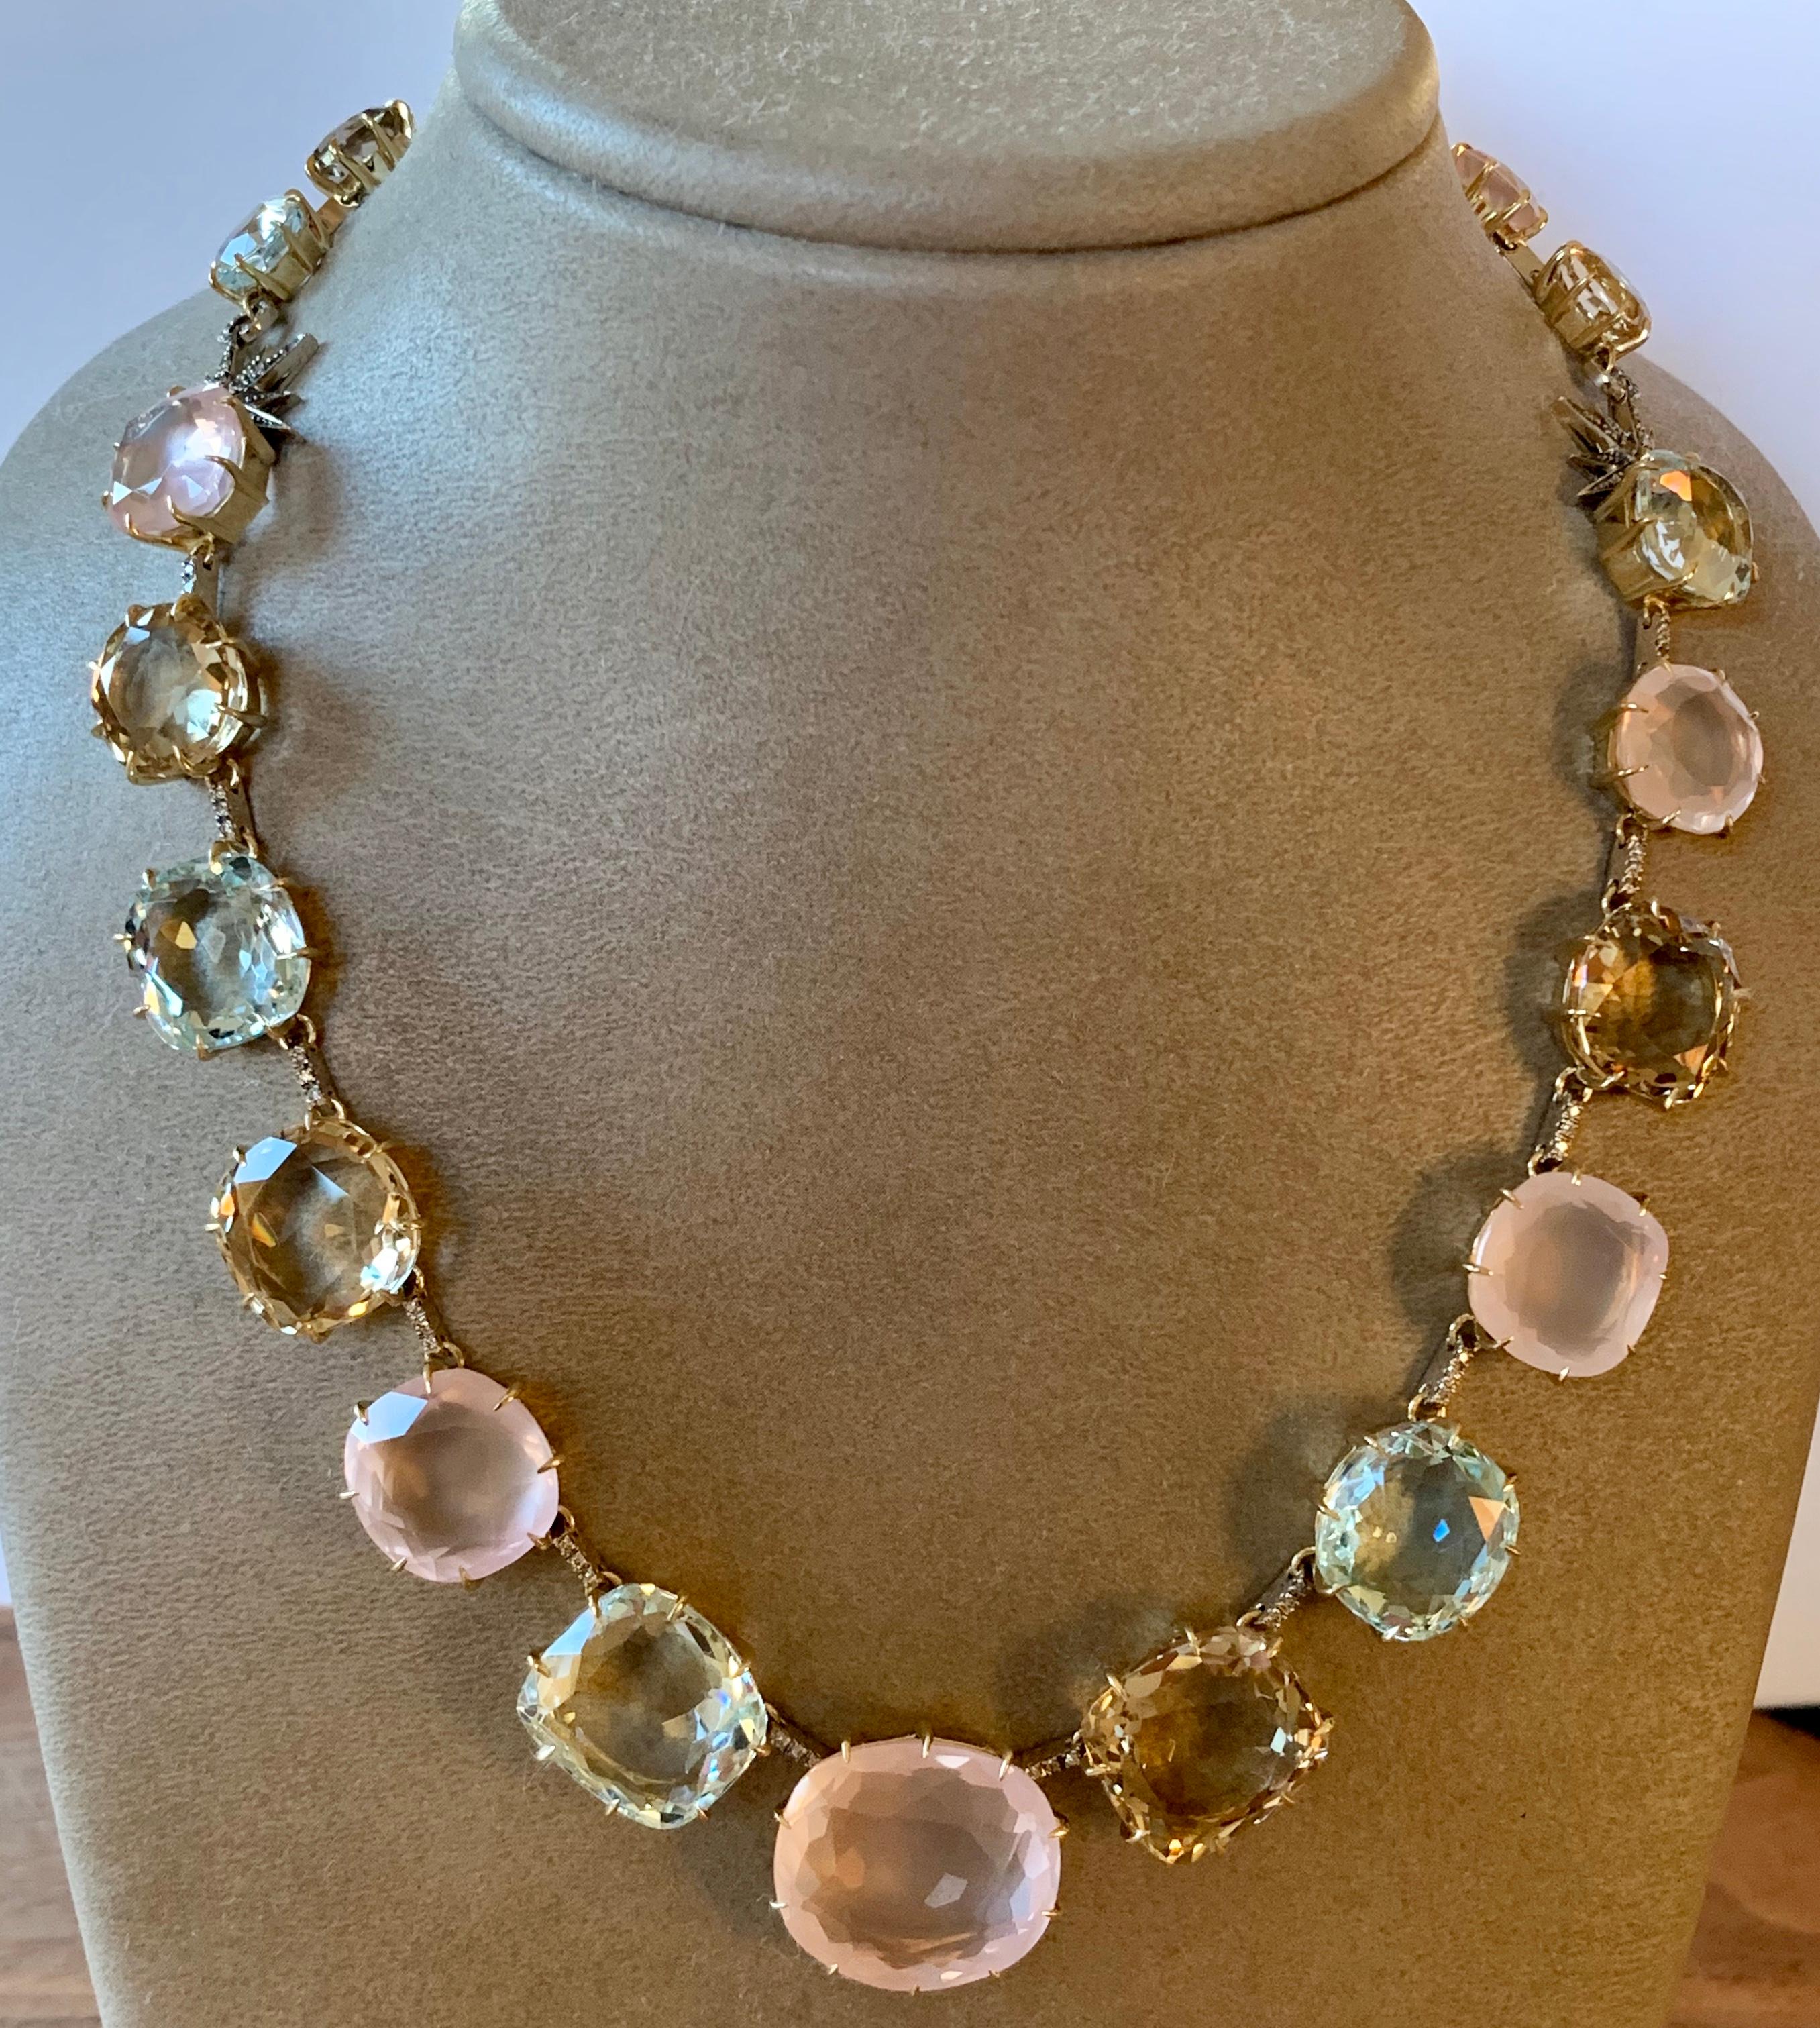 H. Stern 18 K Gold diamond and multicolored faceted gemstones( Rose Quarz, Aquamarine & Ctitrine) necklace from  the Moonlights collection. Current retail $31000. Necklace is 47cm long. Gems range in size from 9mm x 11mm to 21mm x 22mm. The colored